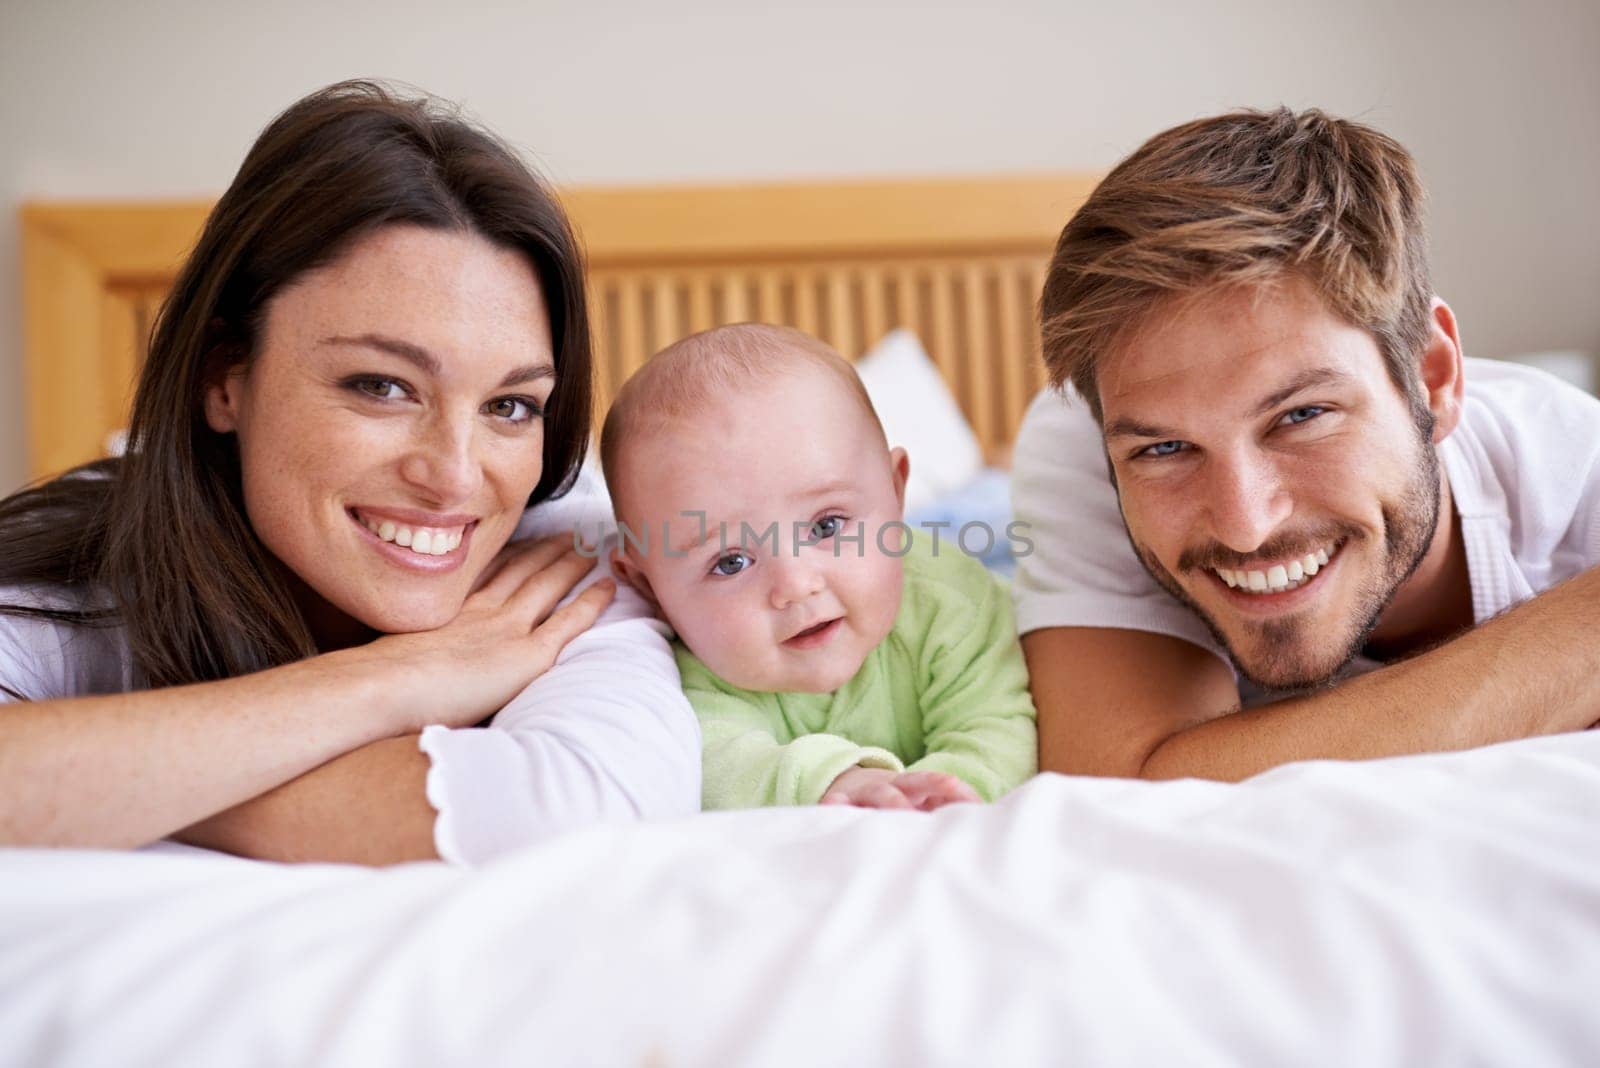 Happy portrait of mother, father and baby on bed for love, care and fun quality time together at home. Parents, cute newborn child and family bonding to relax in bedroom for support, happiness or joy by YuriArcurs